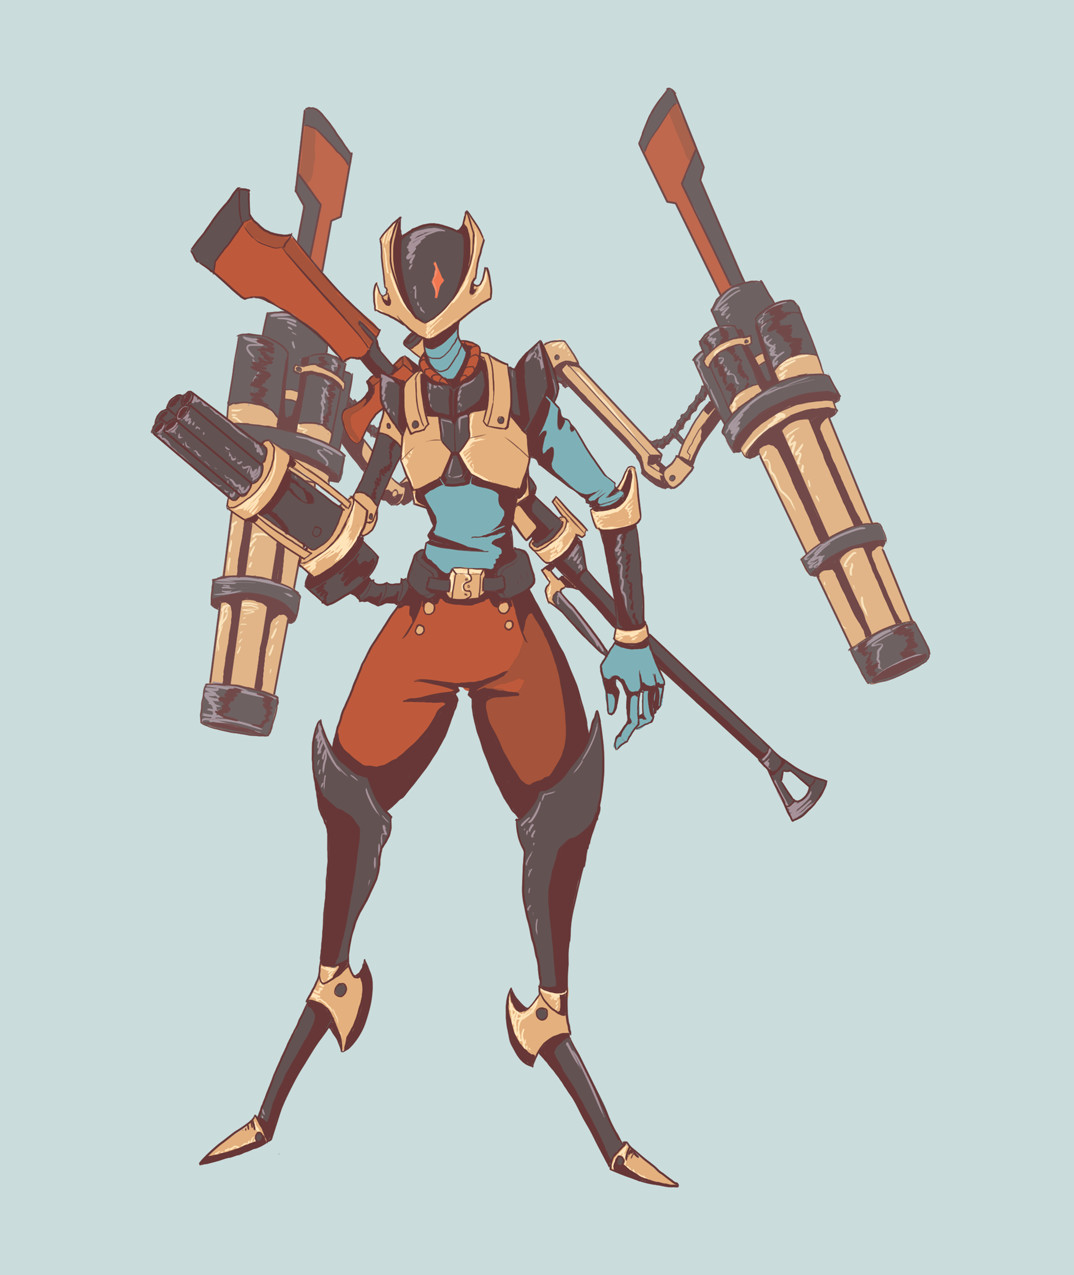 A miscellaneous character design for a robot/cyborg character that has lots of guns. He uses the guns on his back as a turret or to bast himself into the air.